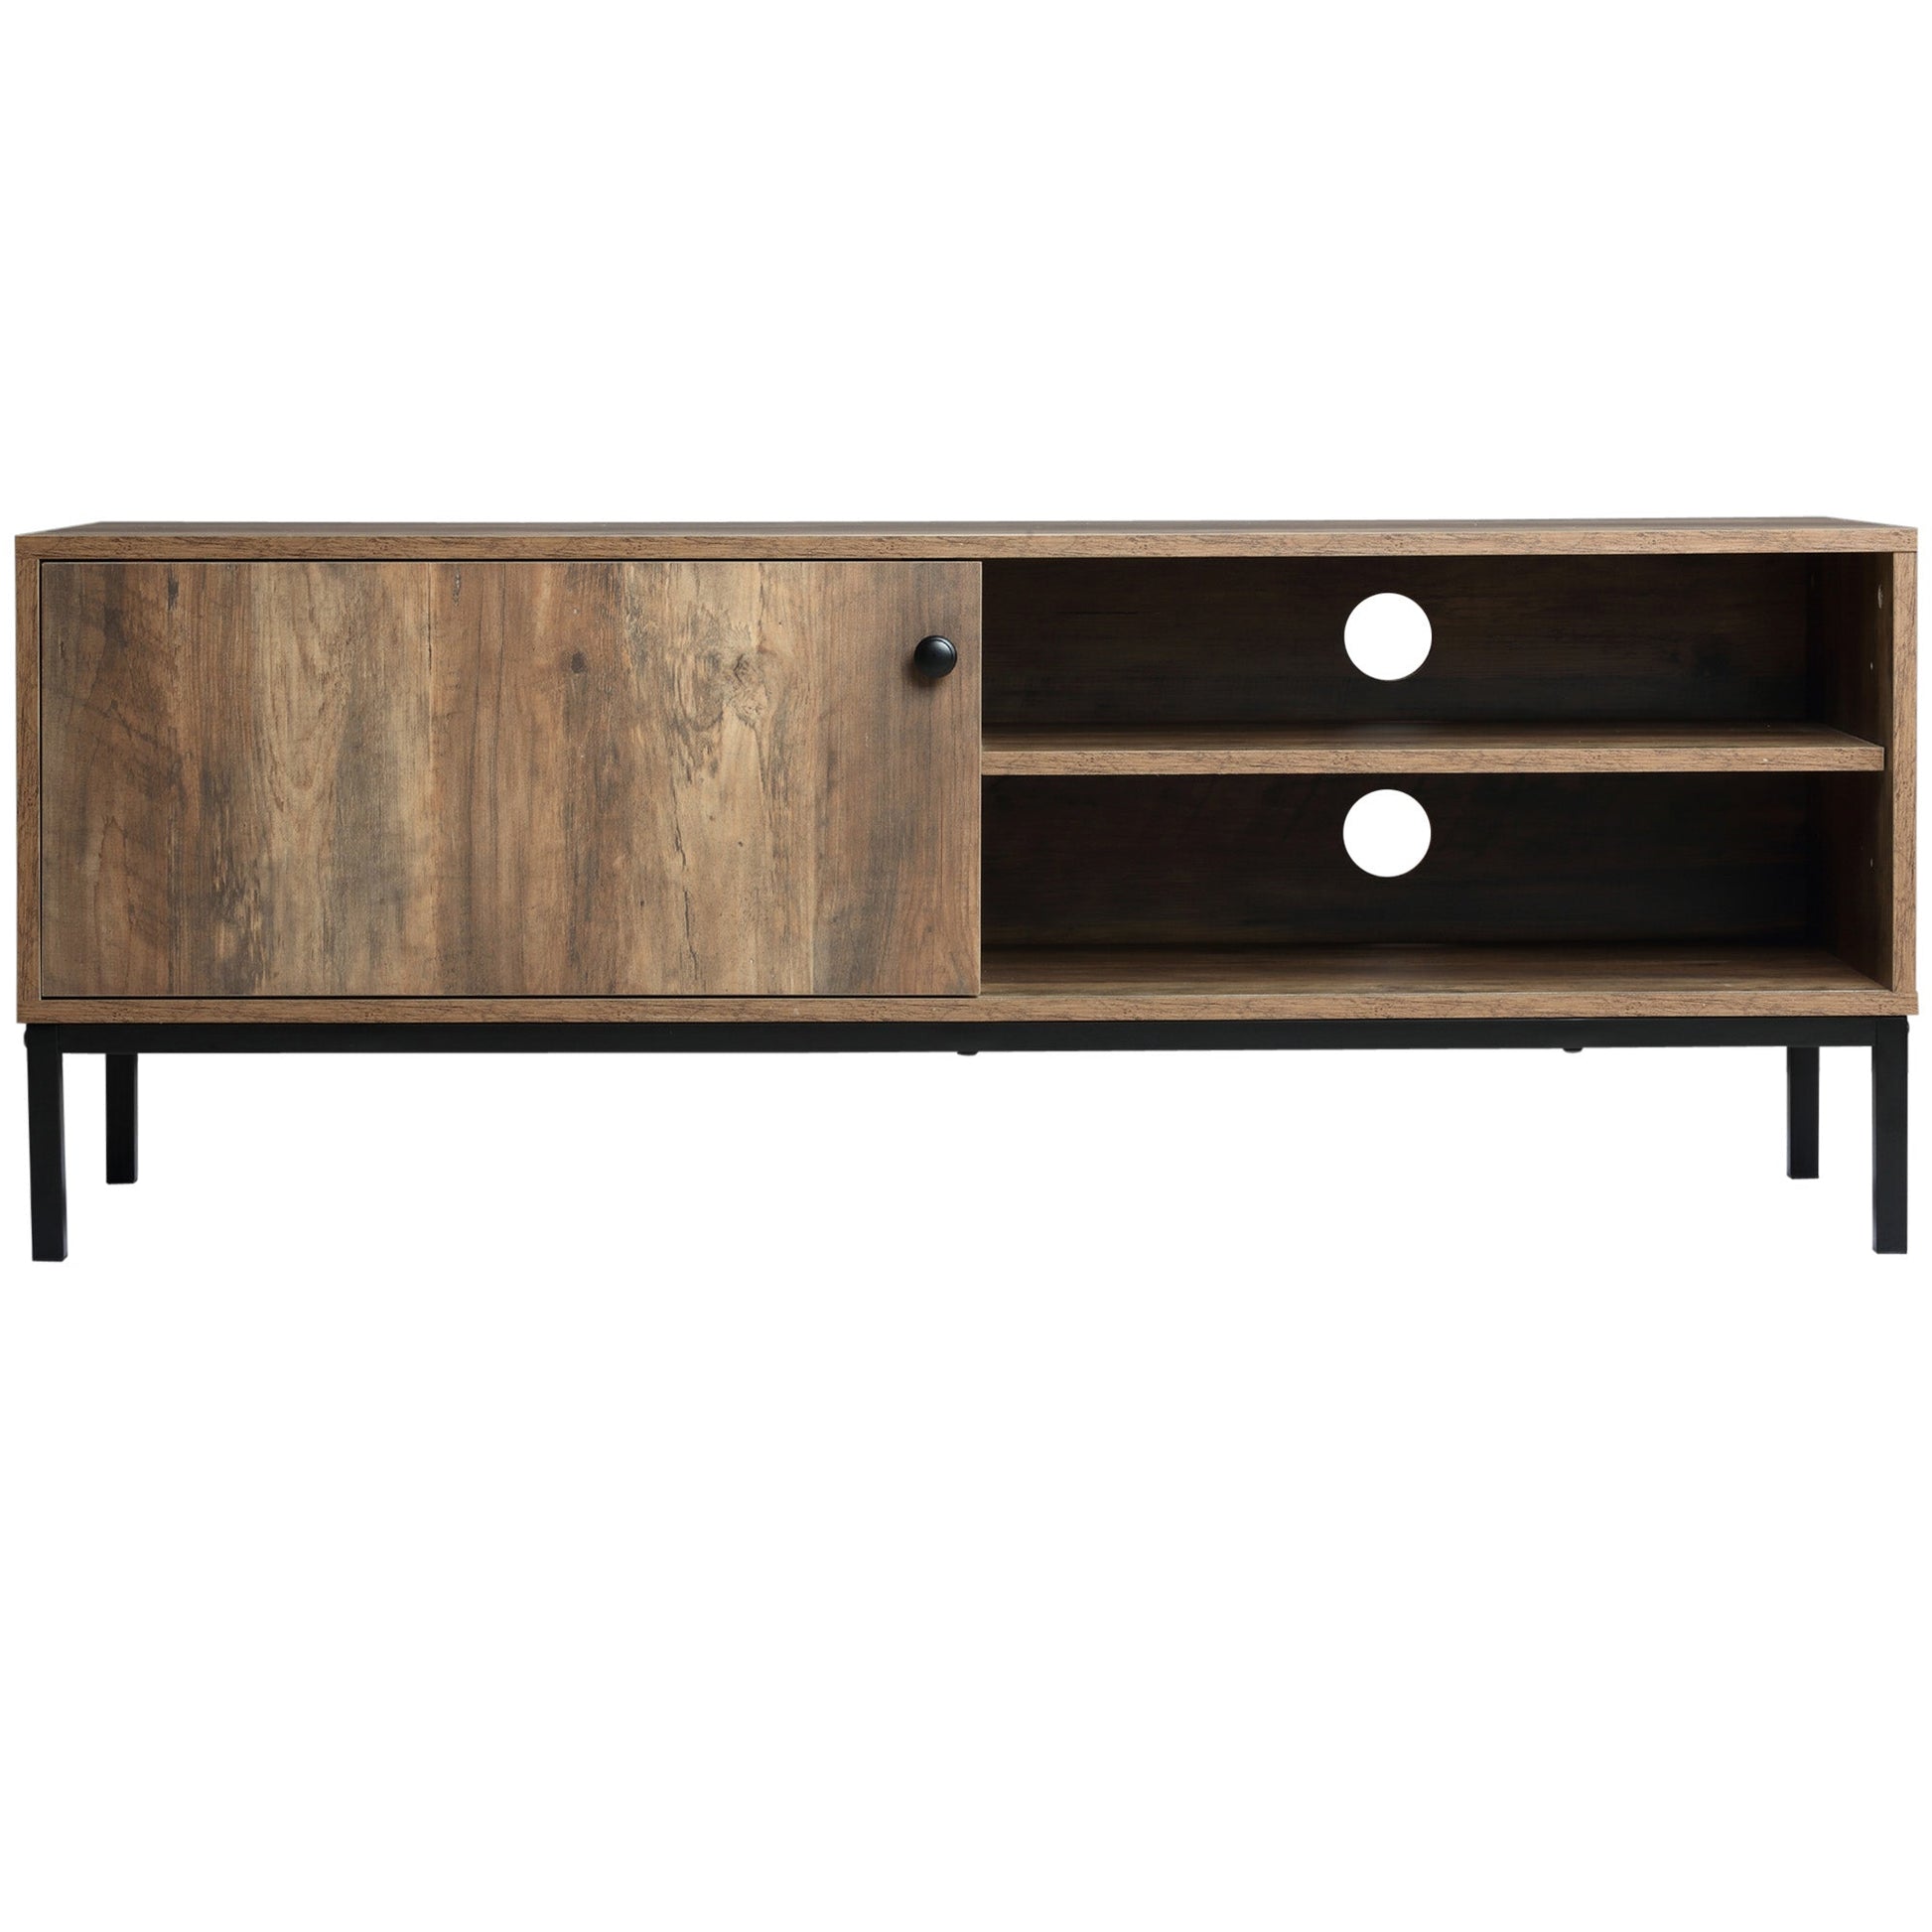 Retro TV Cabinet for TVs up to 50", TV Stand with Compartment and Adjustable Shelf, Media Console with Sliding Door for Living Room, Coffee at Gallery Canada